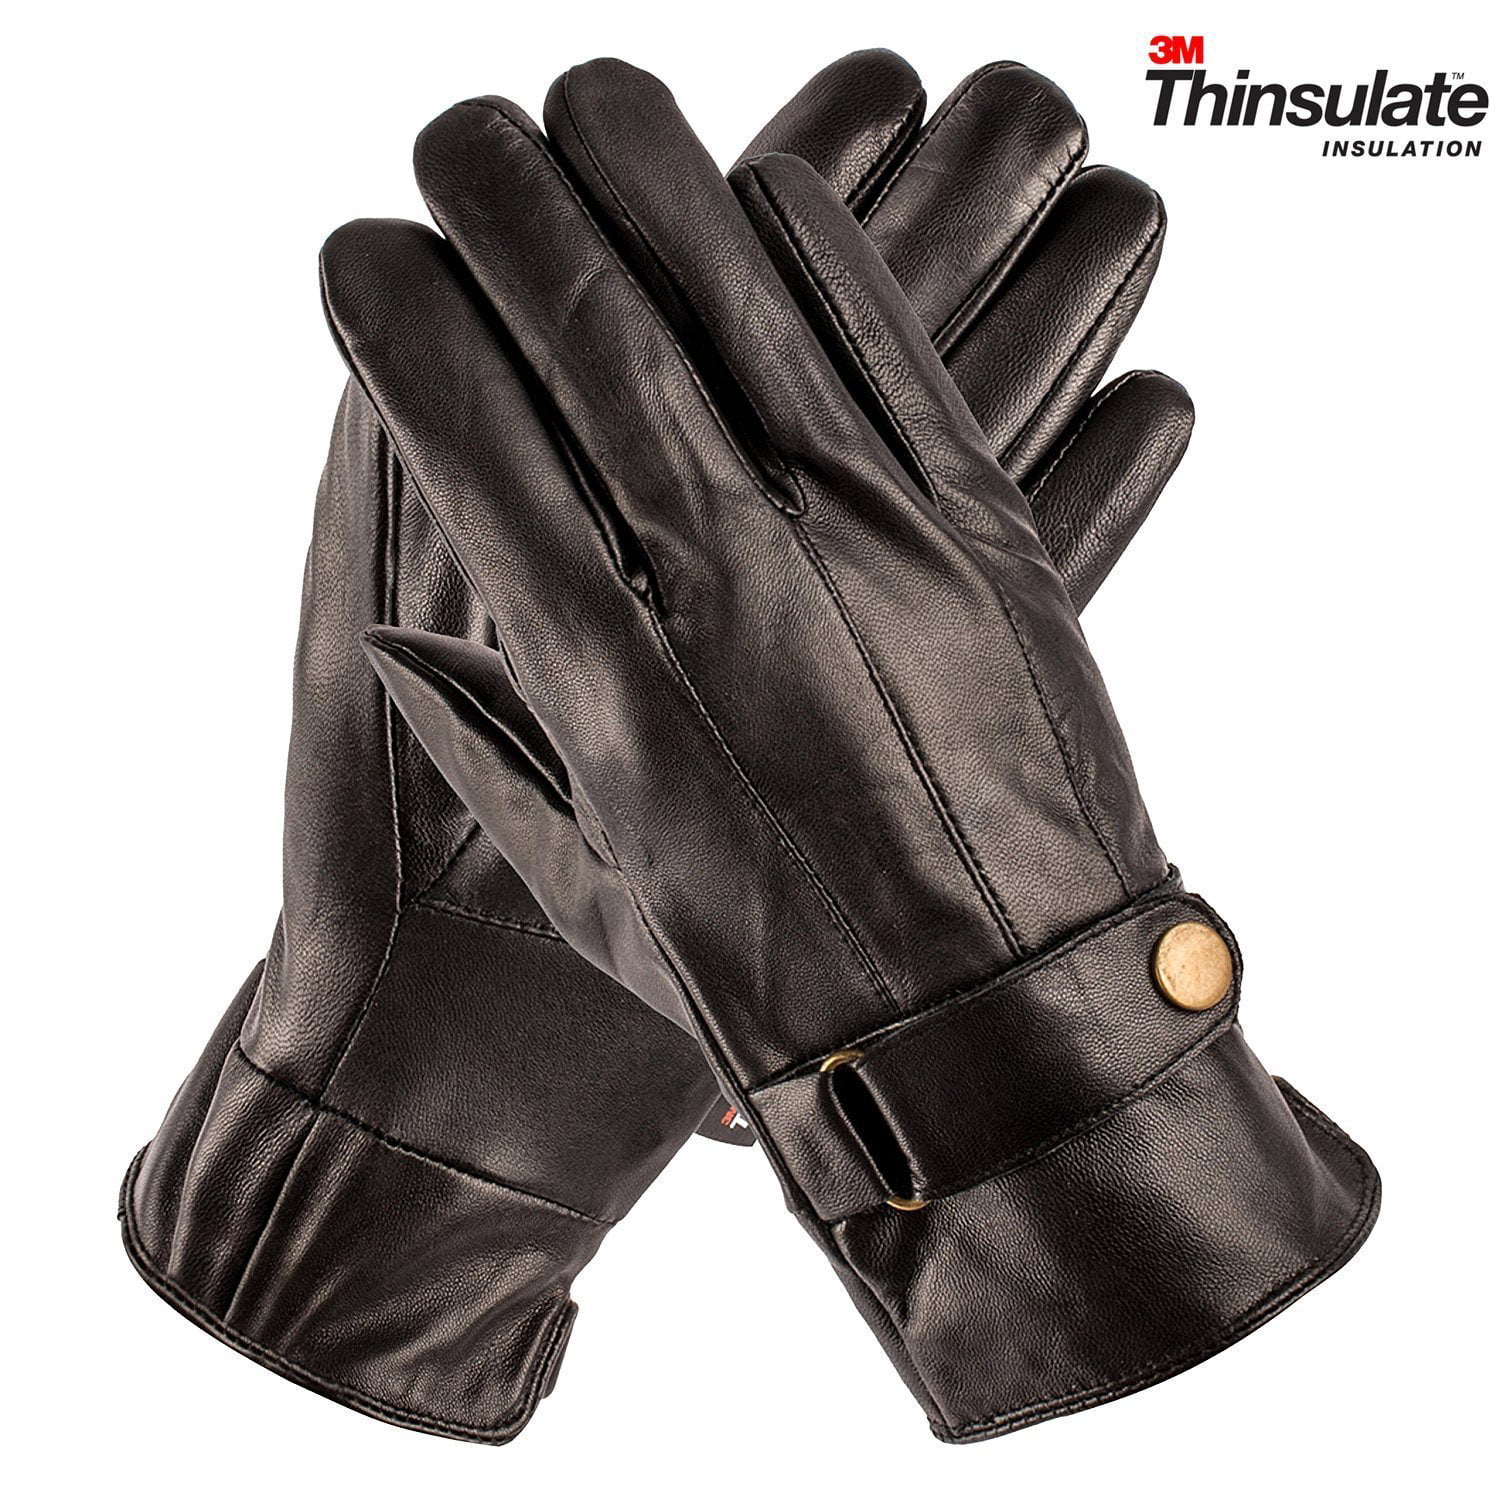 Perfect as Winter Gloves Luxury Driving Gloves Pierre Cardin Mens Leather Gloves